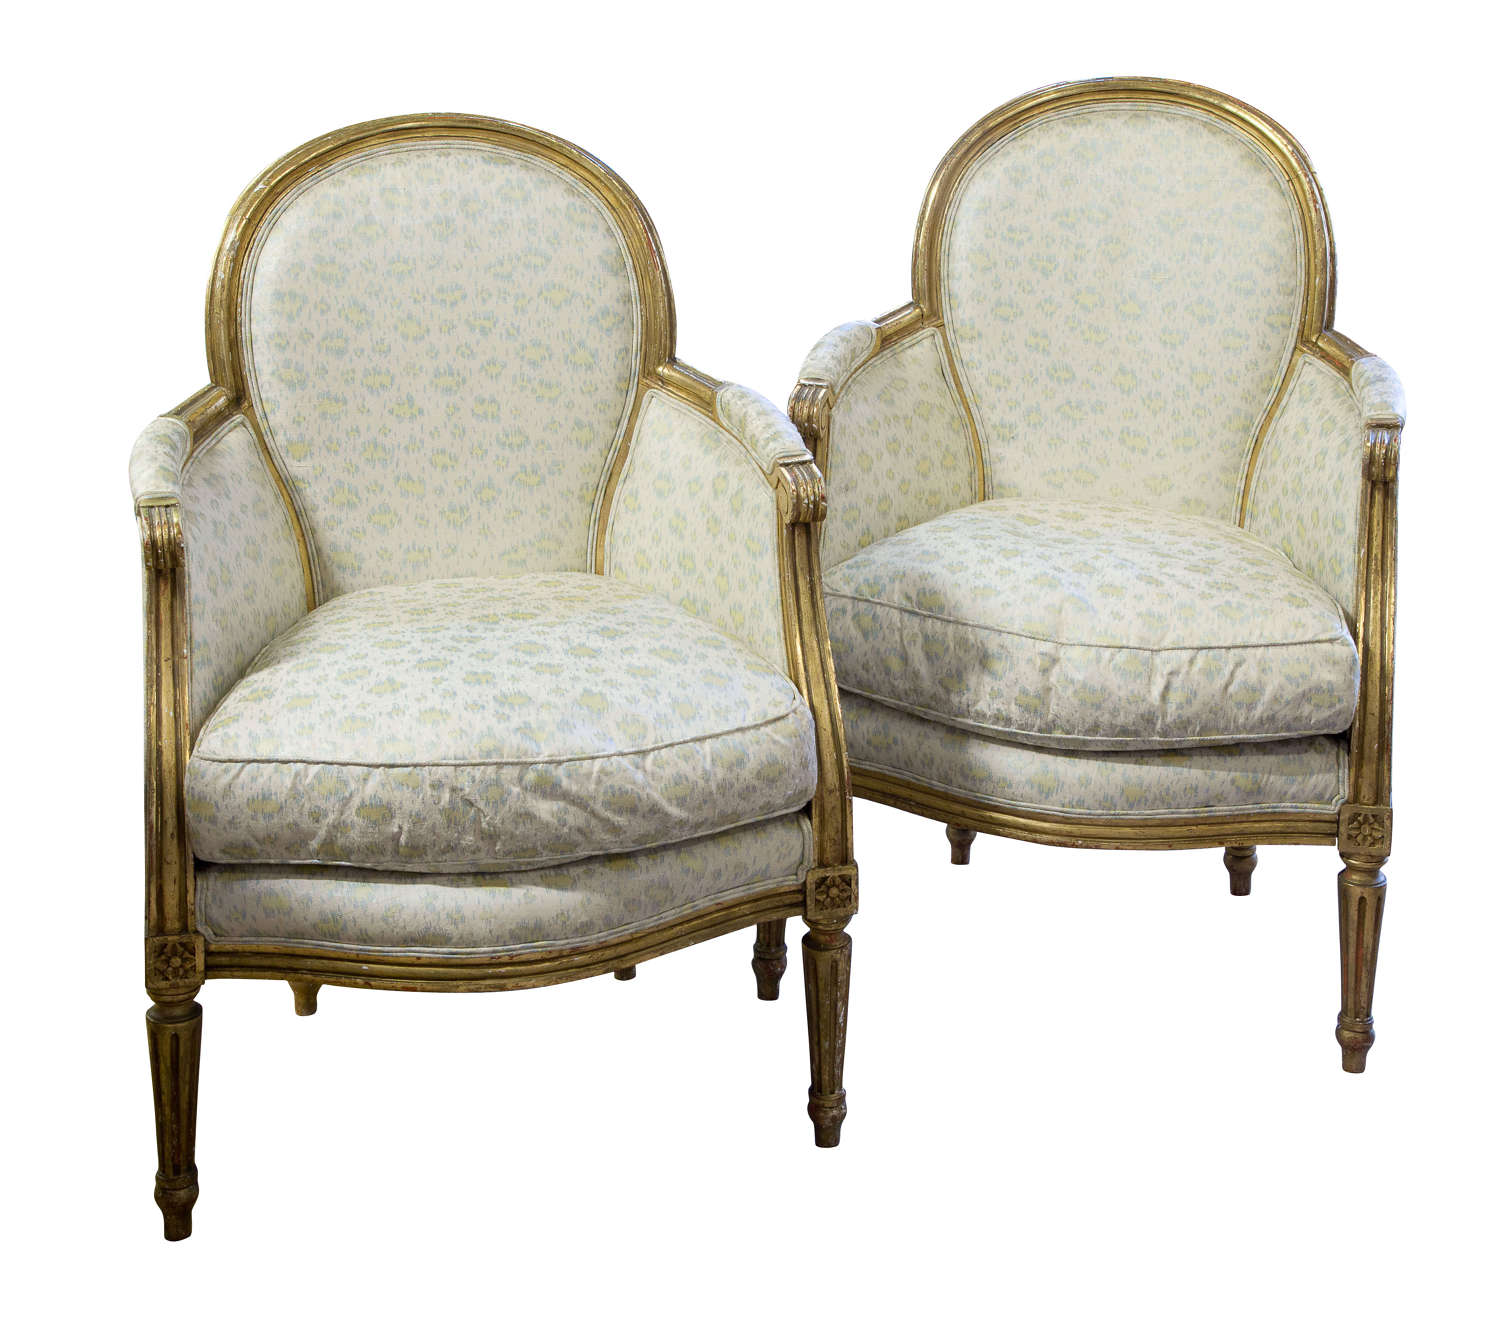 Pair of French gilded armchairs